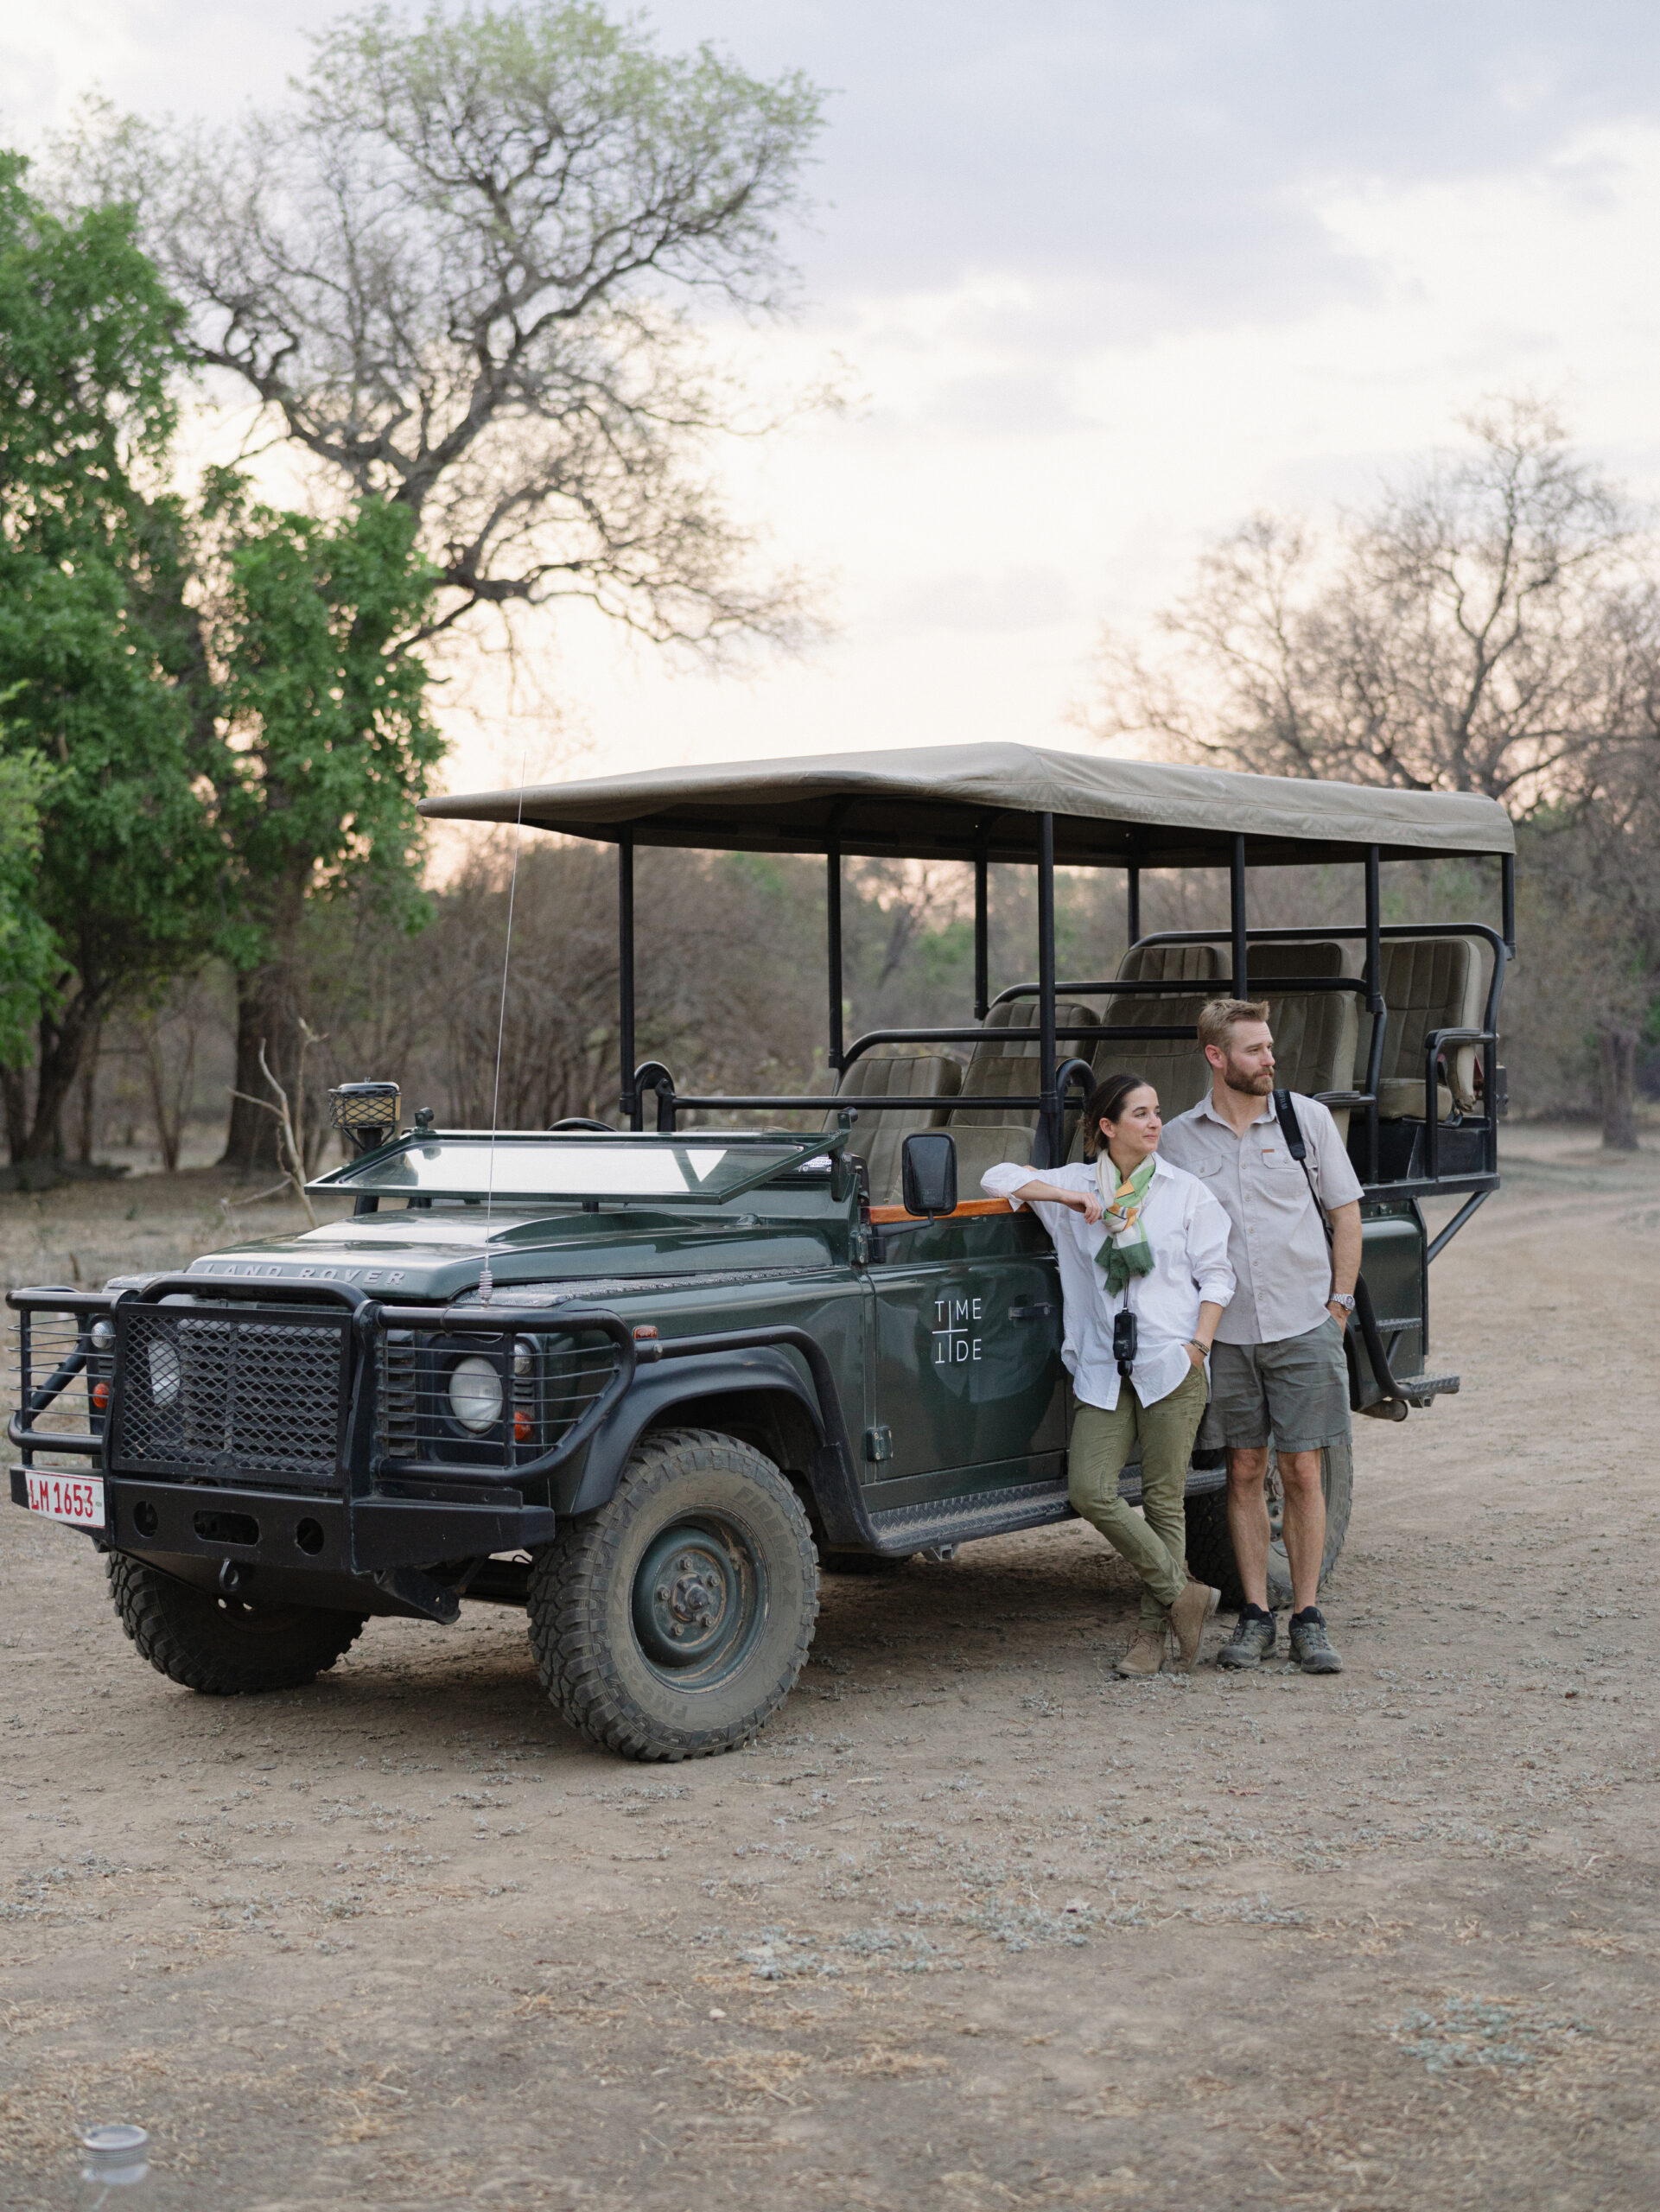 KT Merry's trip to Africa with Time + Tide, luxury safari business